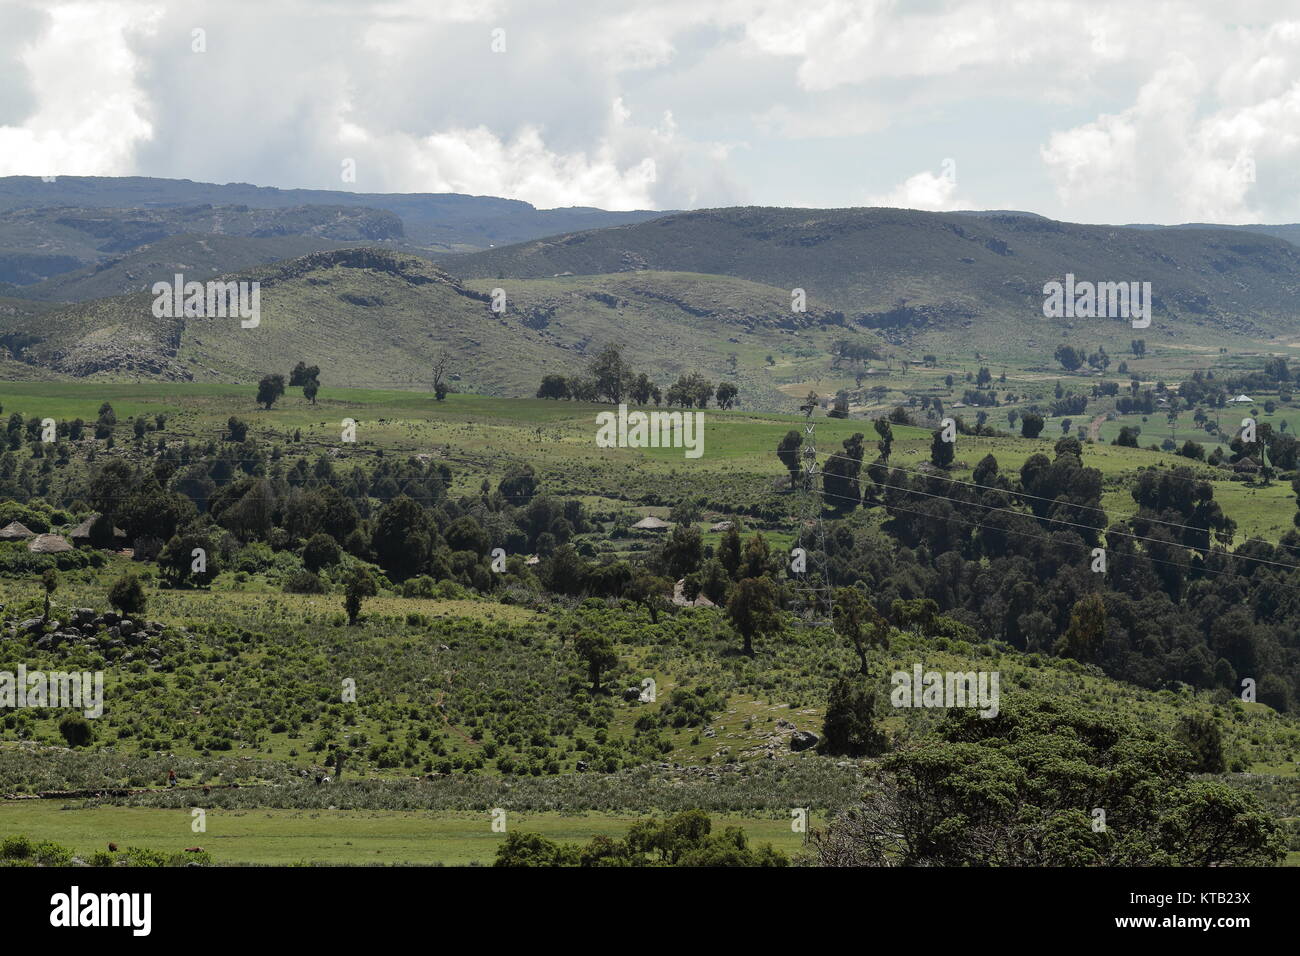 the landscape of the bale mountain national park in ethiopia Stock Photo